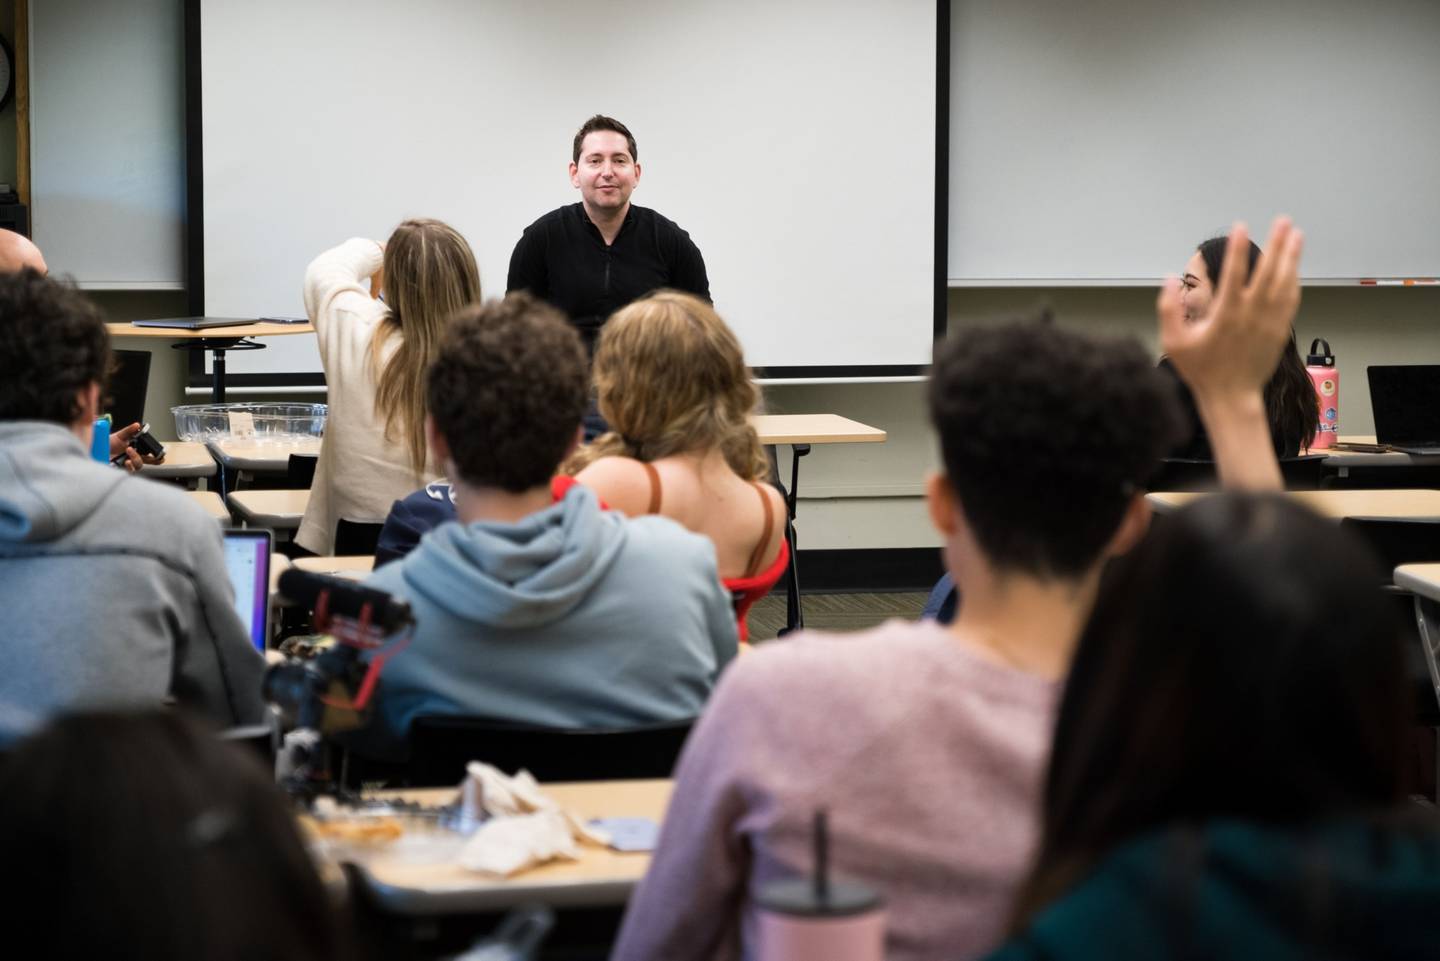 Aaron Dinin teaches a class on “Building Global Audiences” at Duke University in Durham, North Carolina, United States, on Tuesday, April 19, 2022. Photographer: Cornell Watson/Bloombergdfd